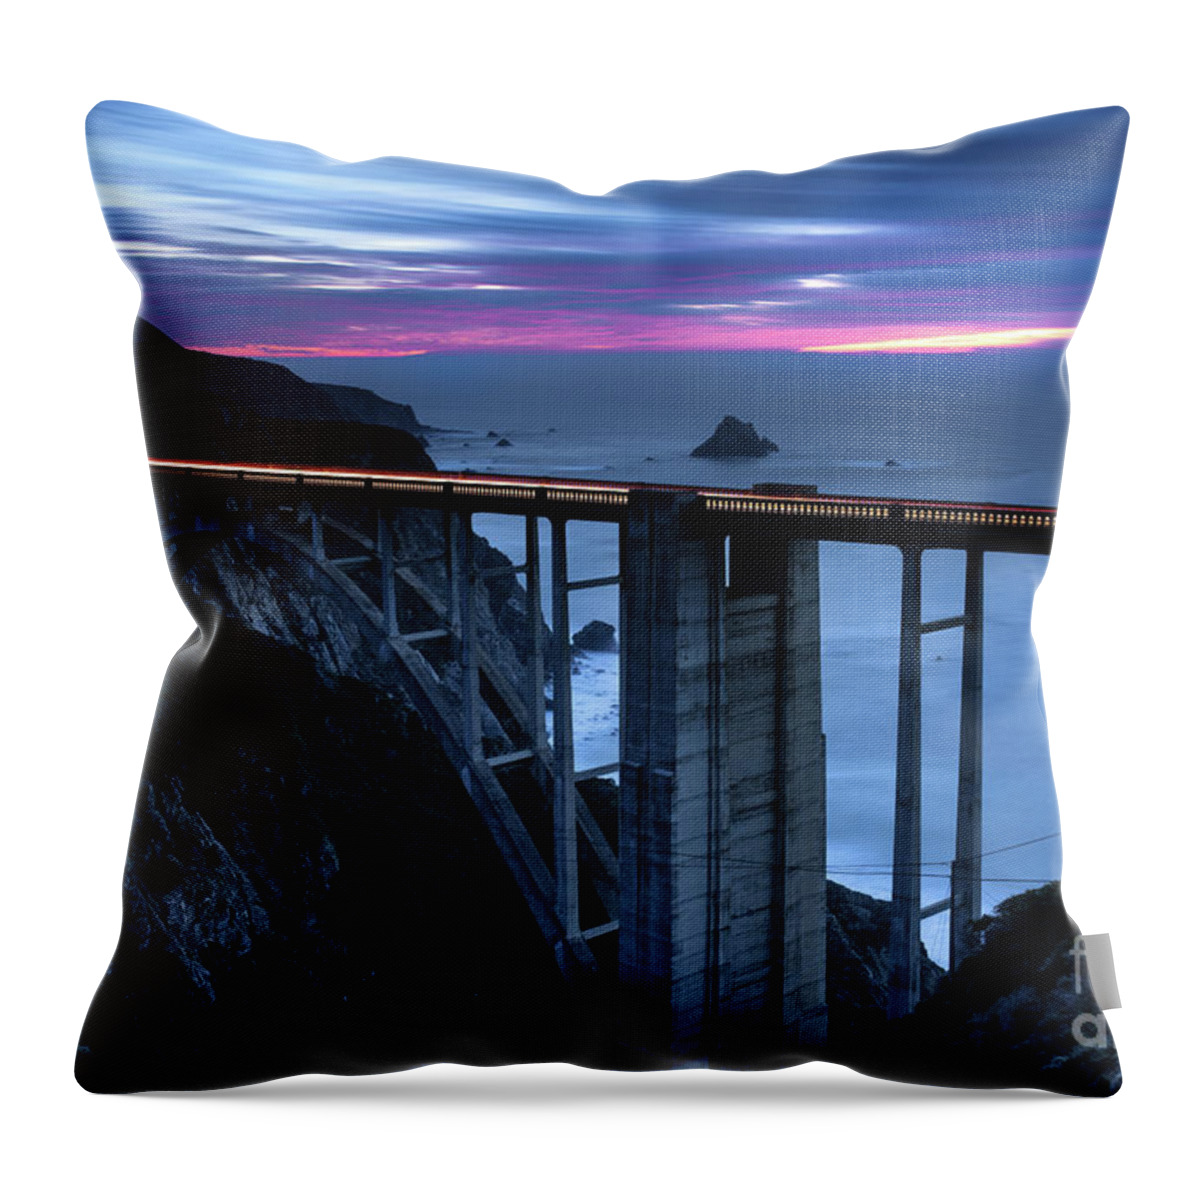 California Throw Pillow featuring the photograph Light Trails Over Bixby Bridge In by Evgeny Tchebotarev